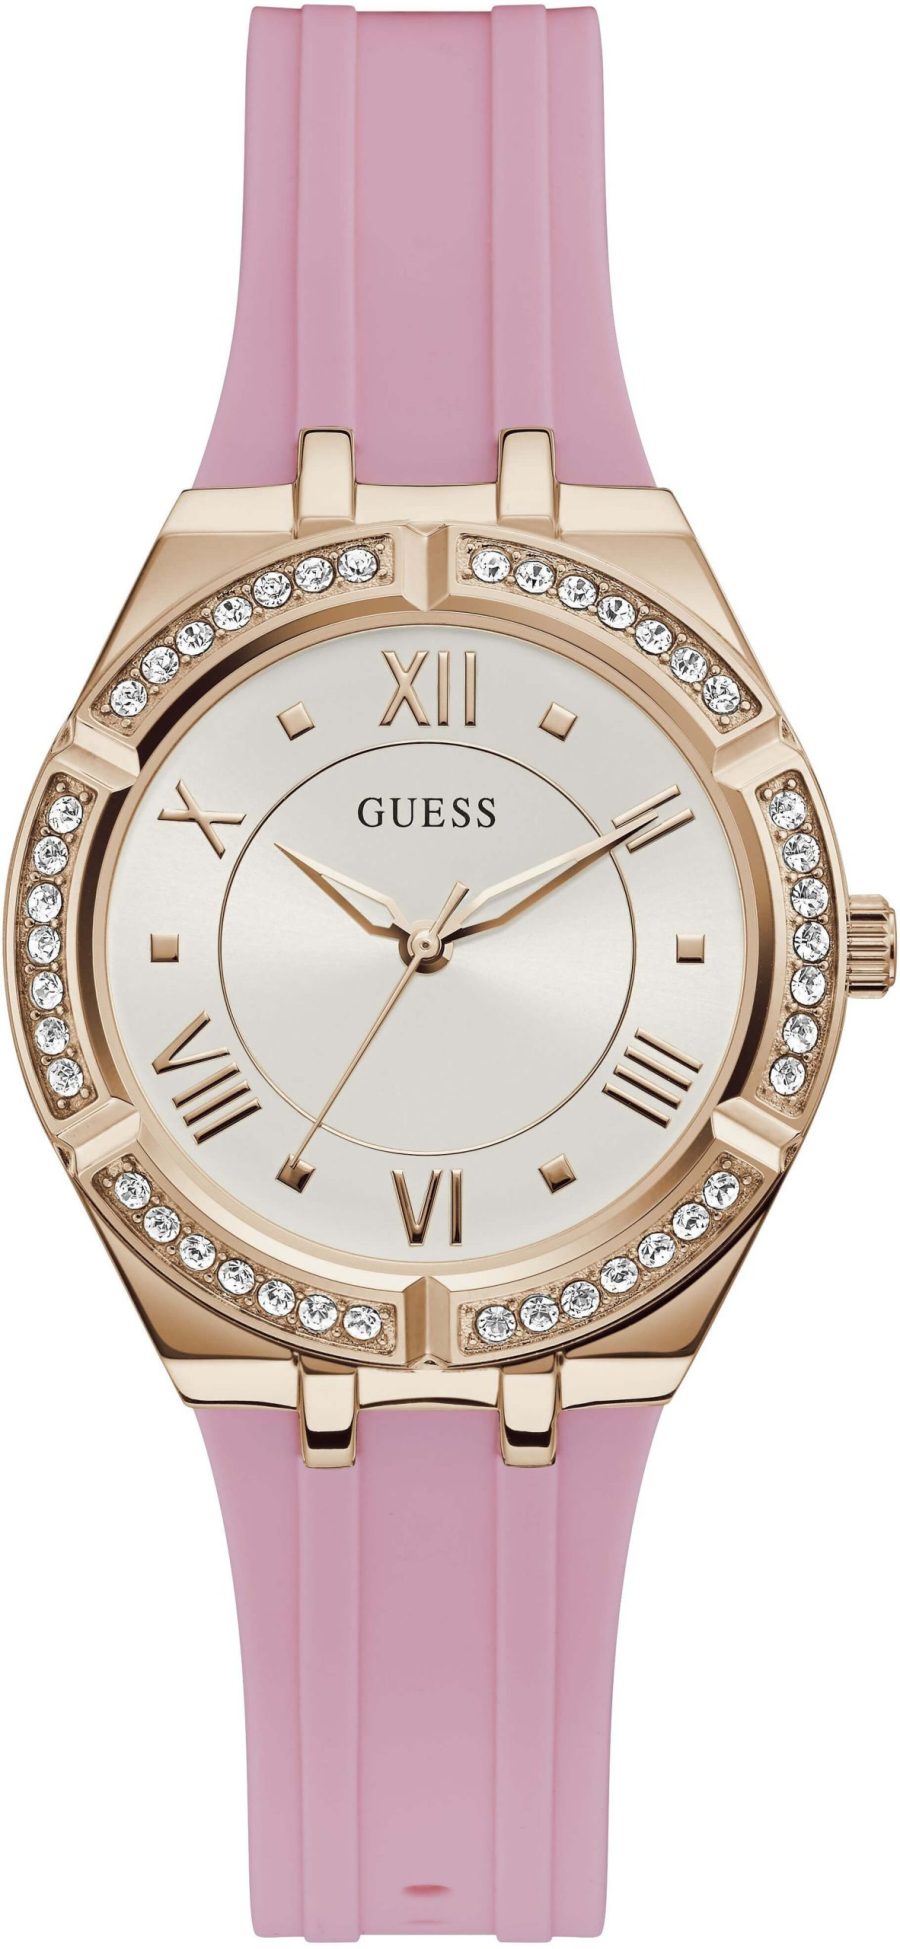 Hodinky GUESS model COSMO GW0034L3